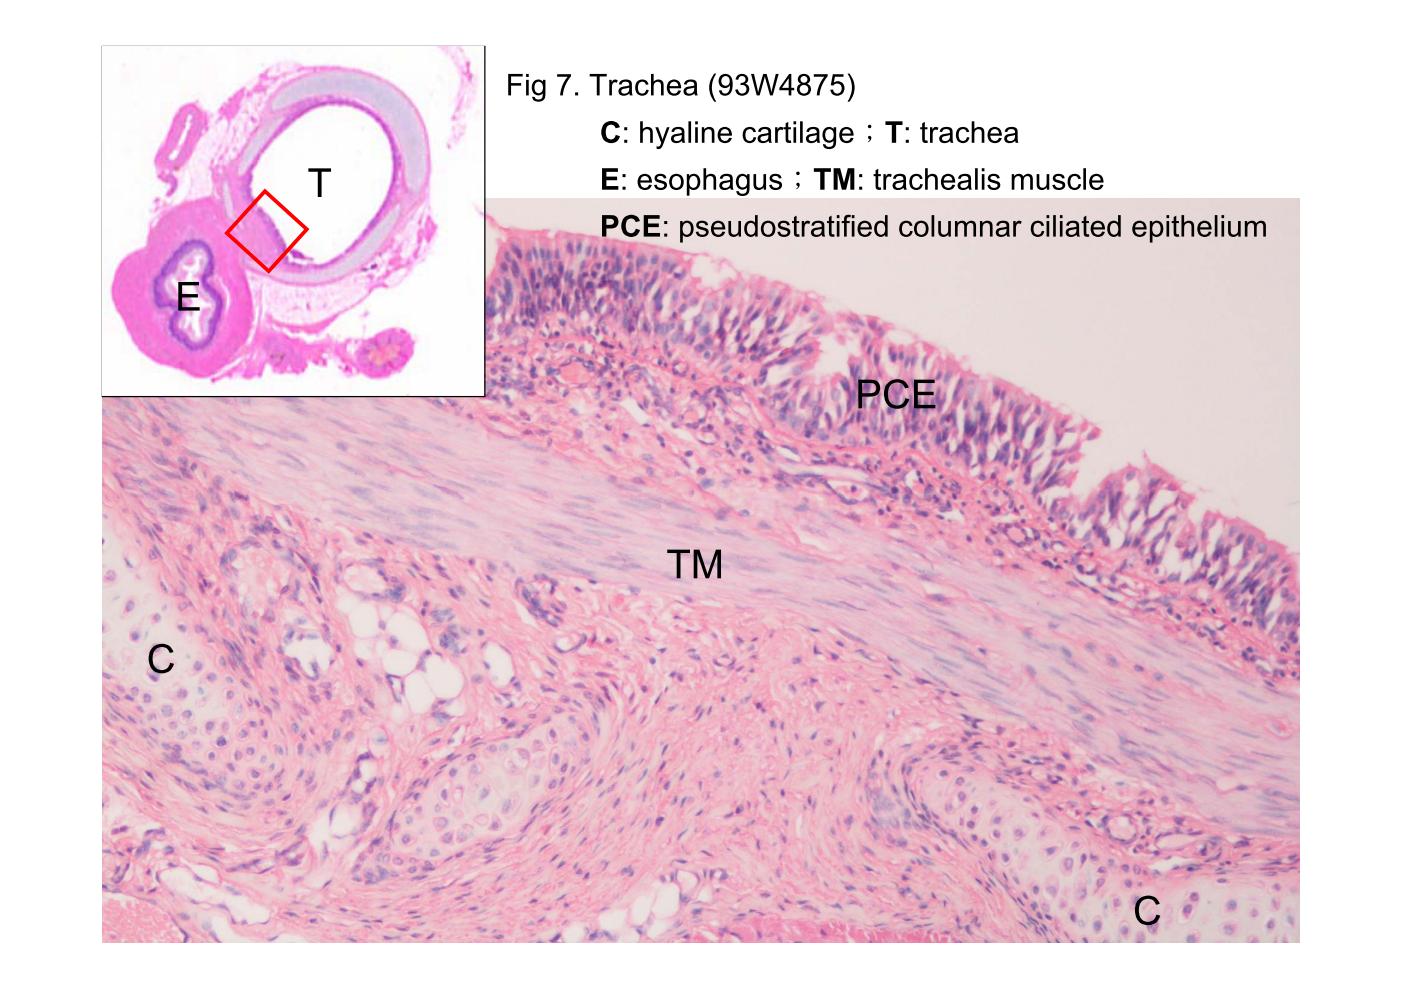 block9_17.jpg - Fig 7. Trachea (93W4875)The trachealis muscle (TM), a band of smooth muscle that fills the gap between the posterior ends of the C-shaped tracheal cartilages (C) is shown here (adjacent to the esophagus). Typical respiratory (ciliated pseudostratified columnar) epithelium lines the trachea and primary bronchi.